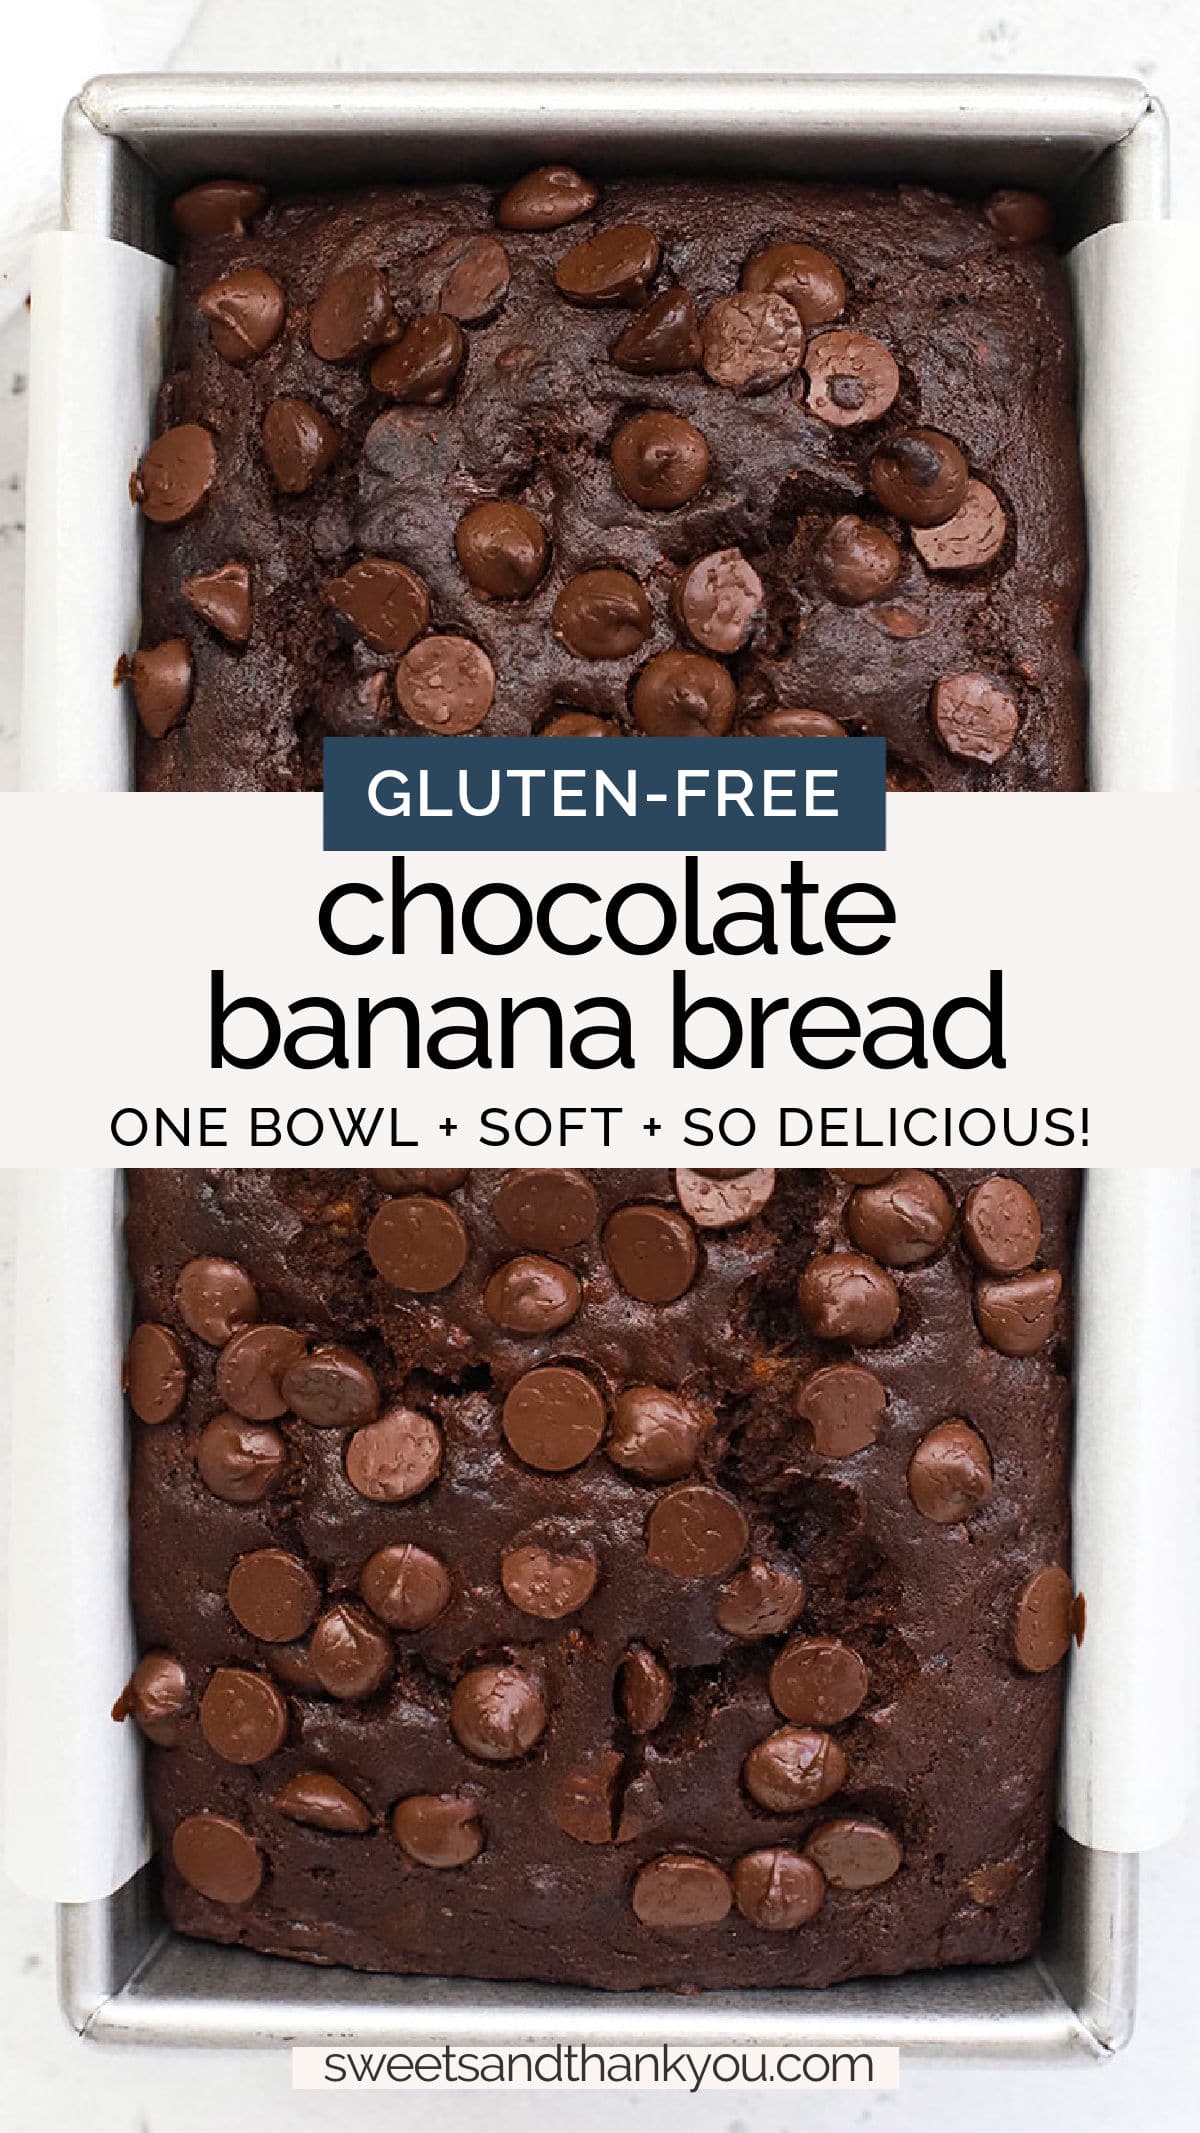 One Bowl Gluten-Free Chocolate Banana Bread - This gluten-free chocolate chocolate chip banana bread recipe is such a delightful way to use up your overripe bananas! It might just become your new favorite. // gluten-free double chocolate banana bread // gluten-free banana bread recipe // gluten-free chocolate chip banana bread // one bowl gluten-free banana bread // easy gluten-free banana bread // chocolate banana bread recipe